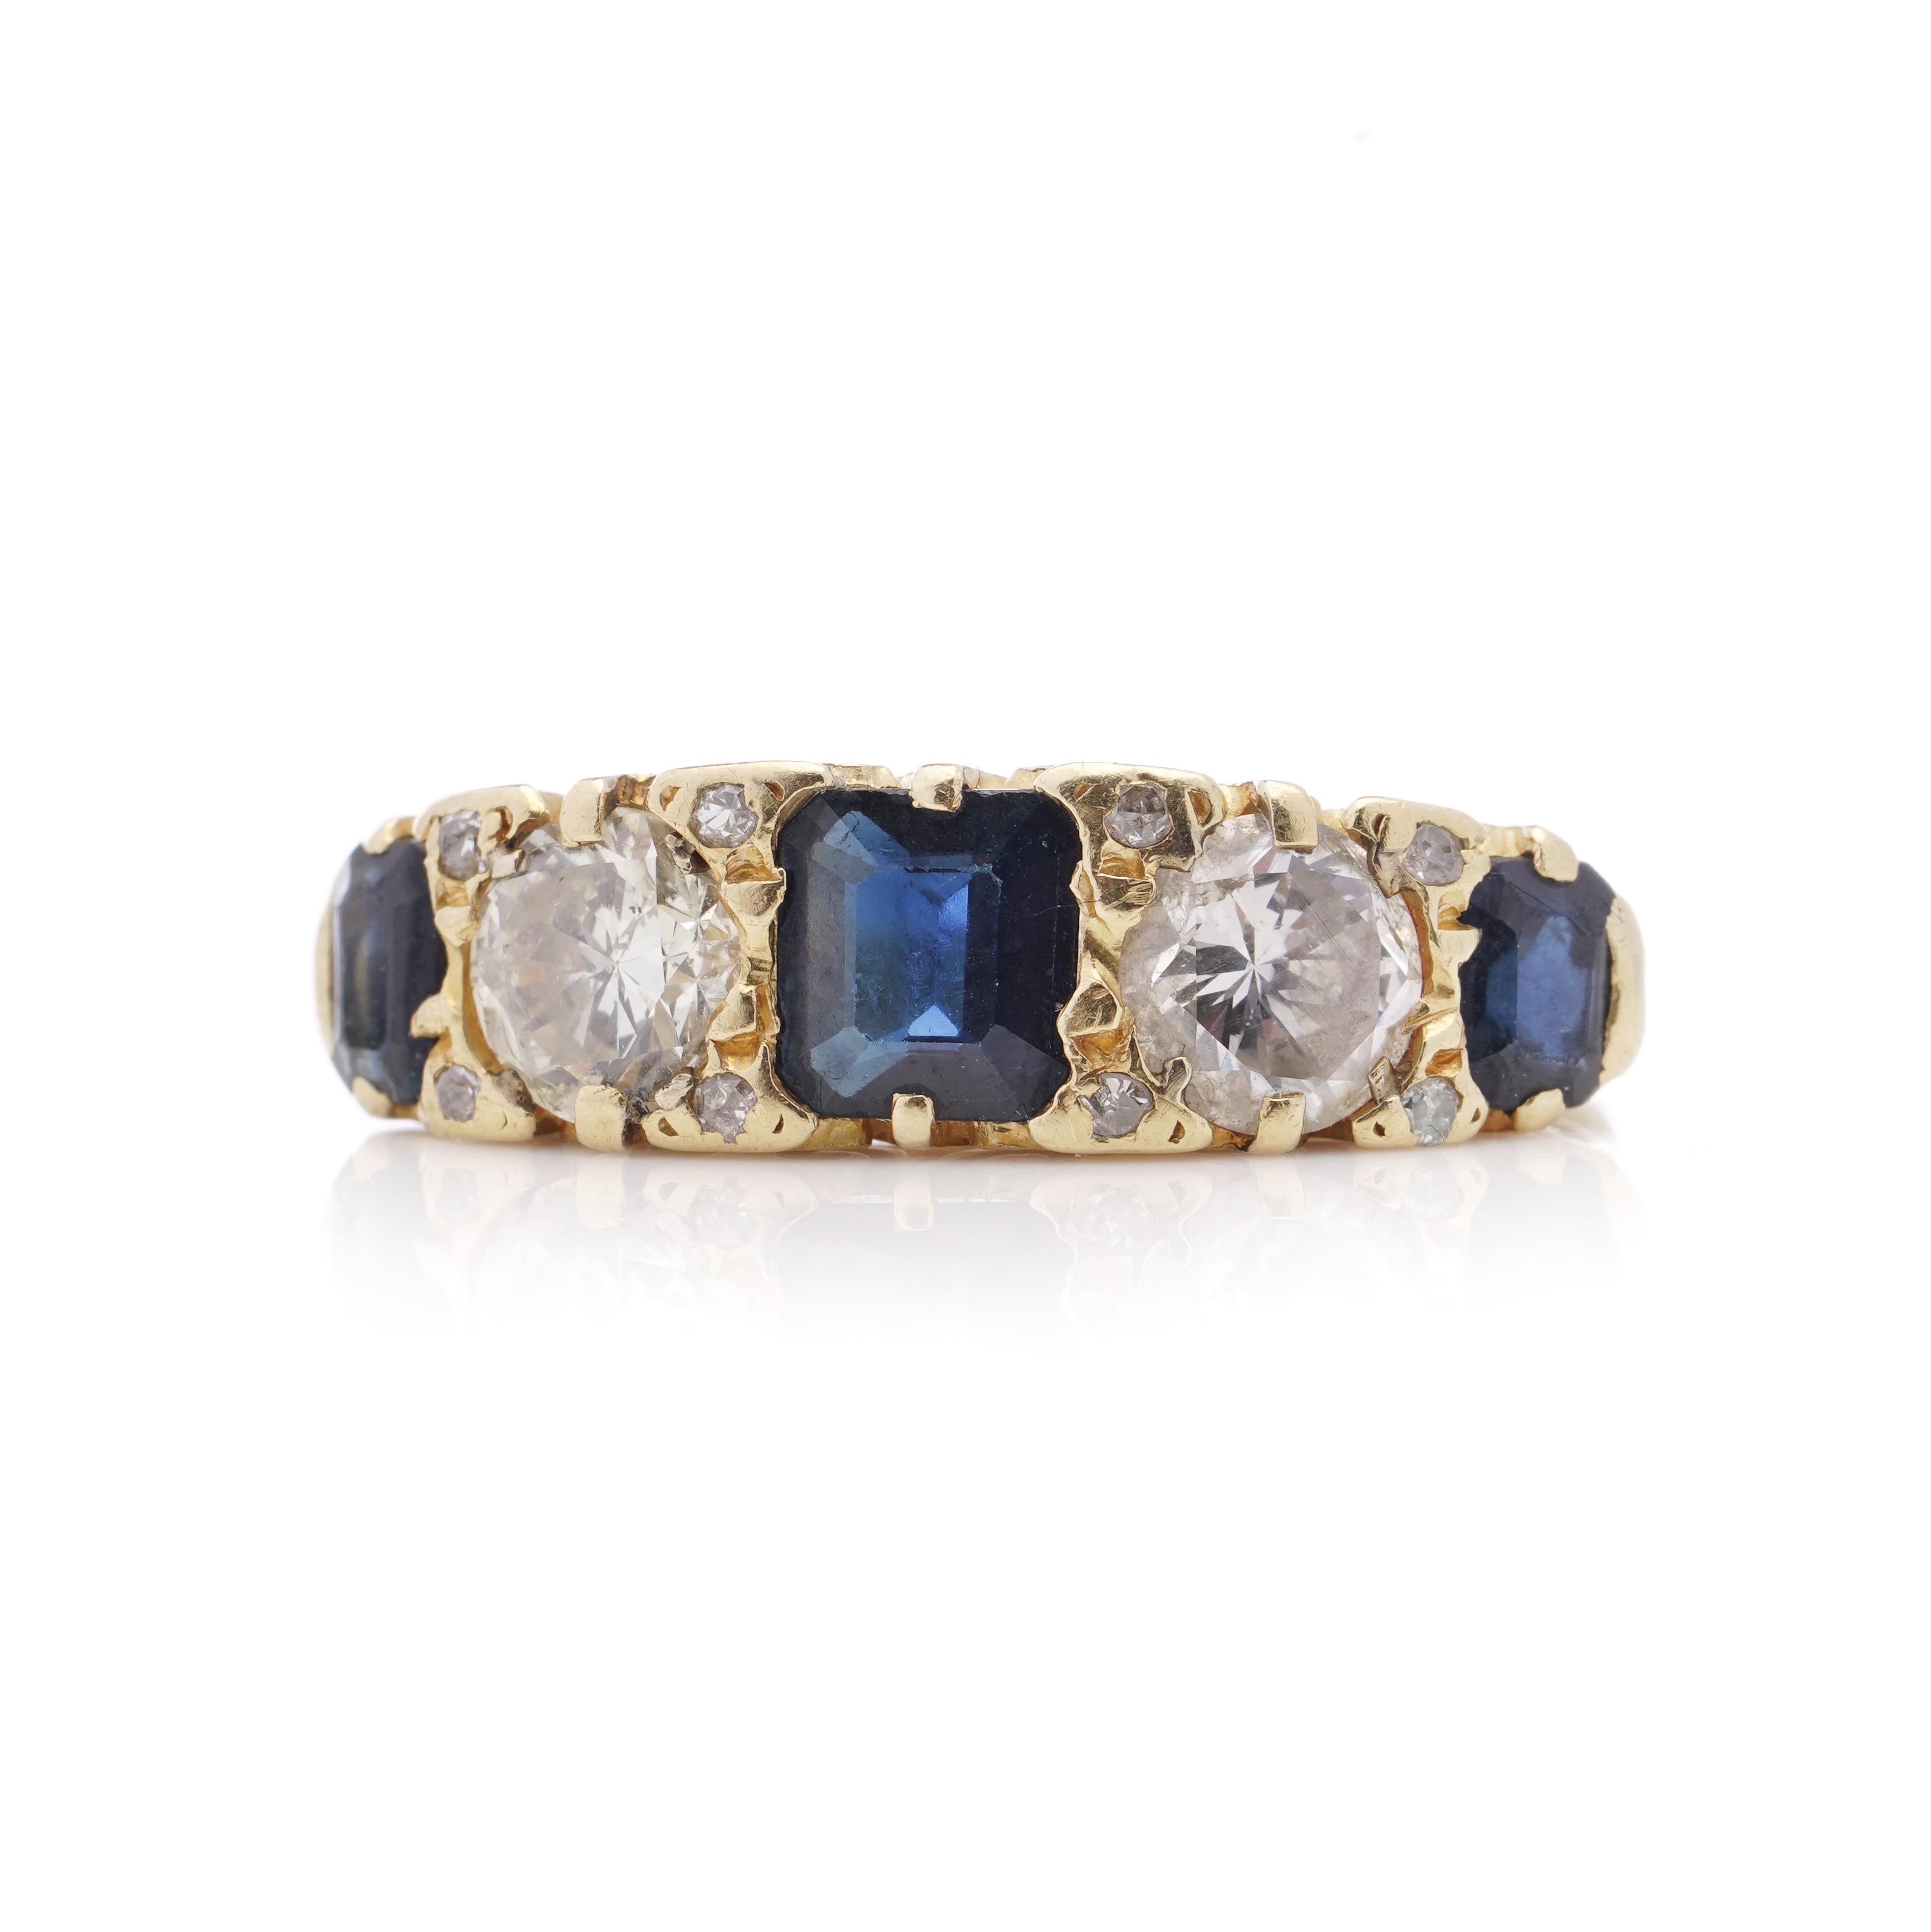 Vintage 18kt yellow gold 5 stone ladies ring with 1.55 carats square - cut sapphires  and 1.50 carats round brilliant diamonds. 
Tested positive for 18kt. yellow gold. 
The ring has scroll gallery decoration. 

Made in England, Circa 1970's, in